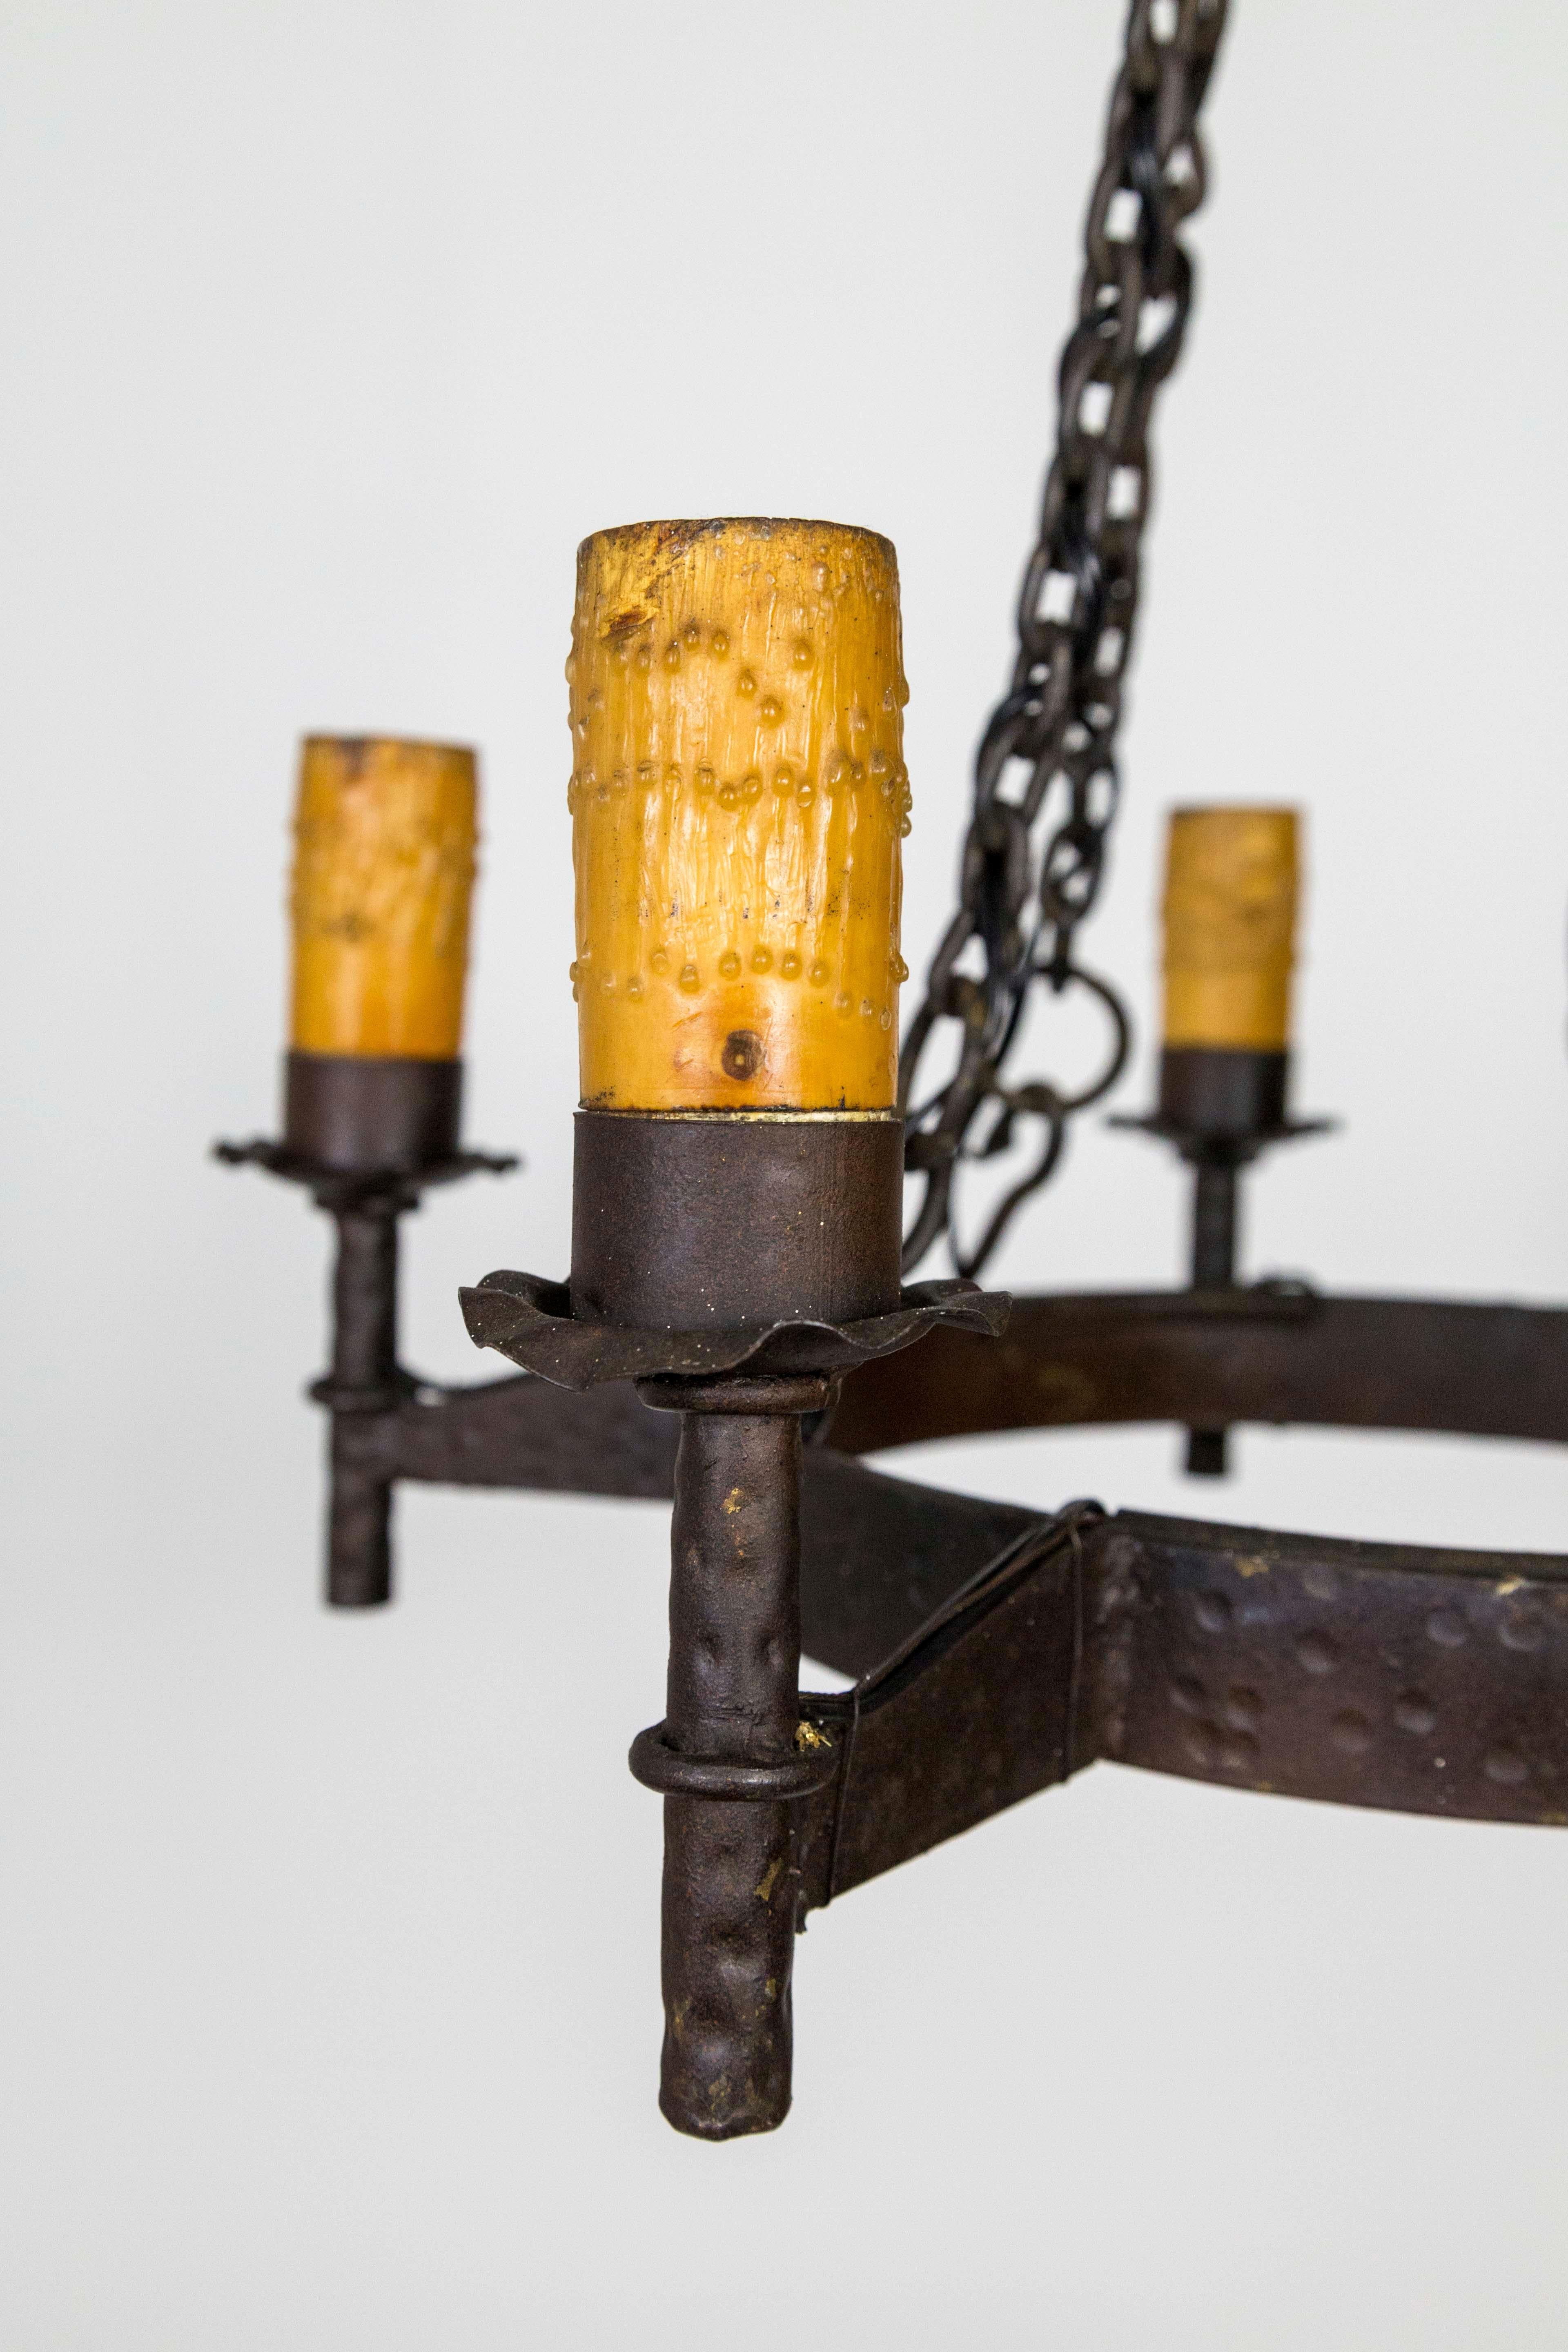 Handwrought iron, medieval Revival chandelier with hammered texture and five-light with stout, beeswax covered, wooden candle covers, American, 1910. Newly rewired. Measures: 22